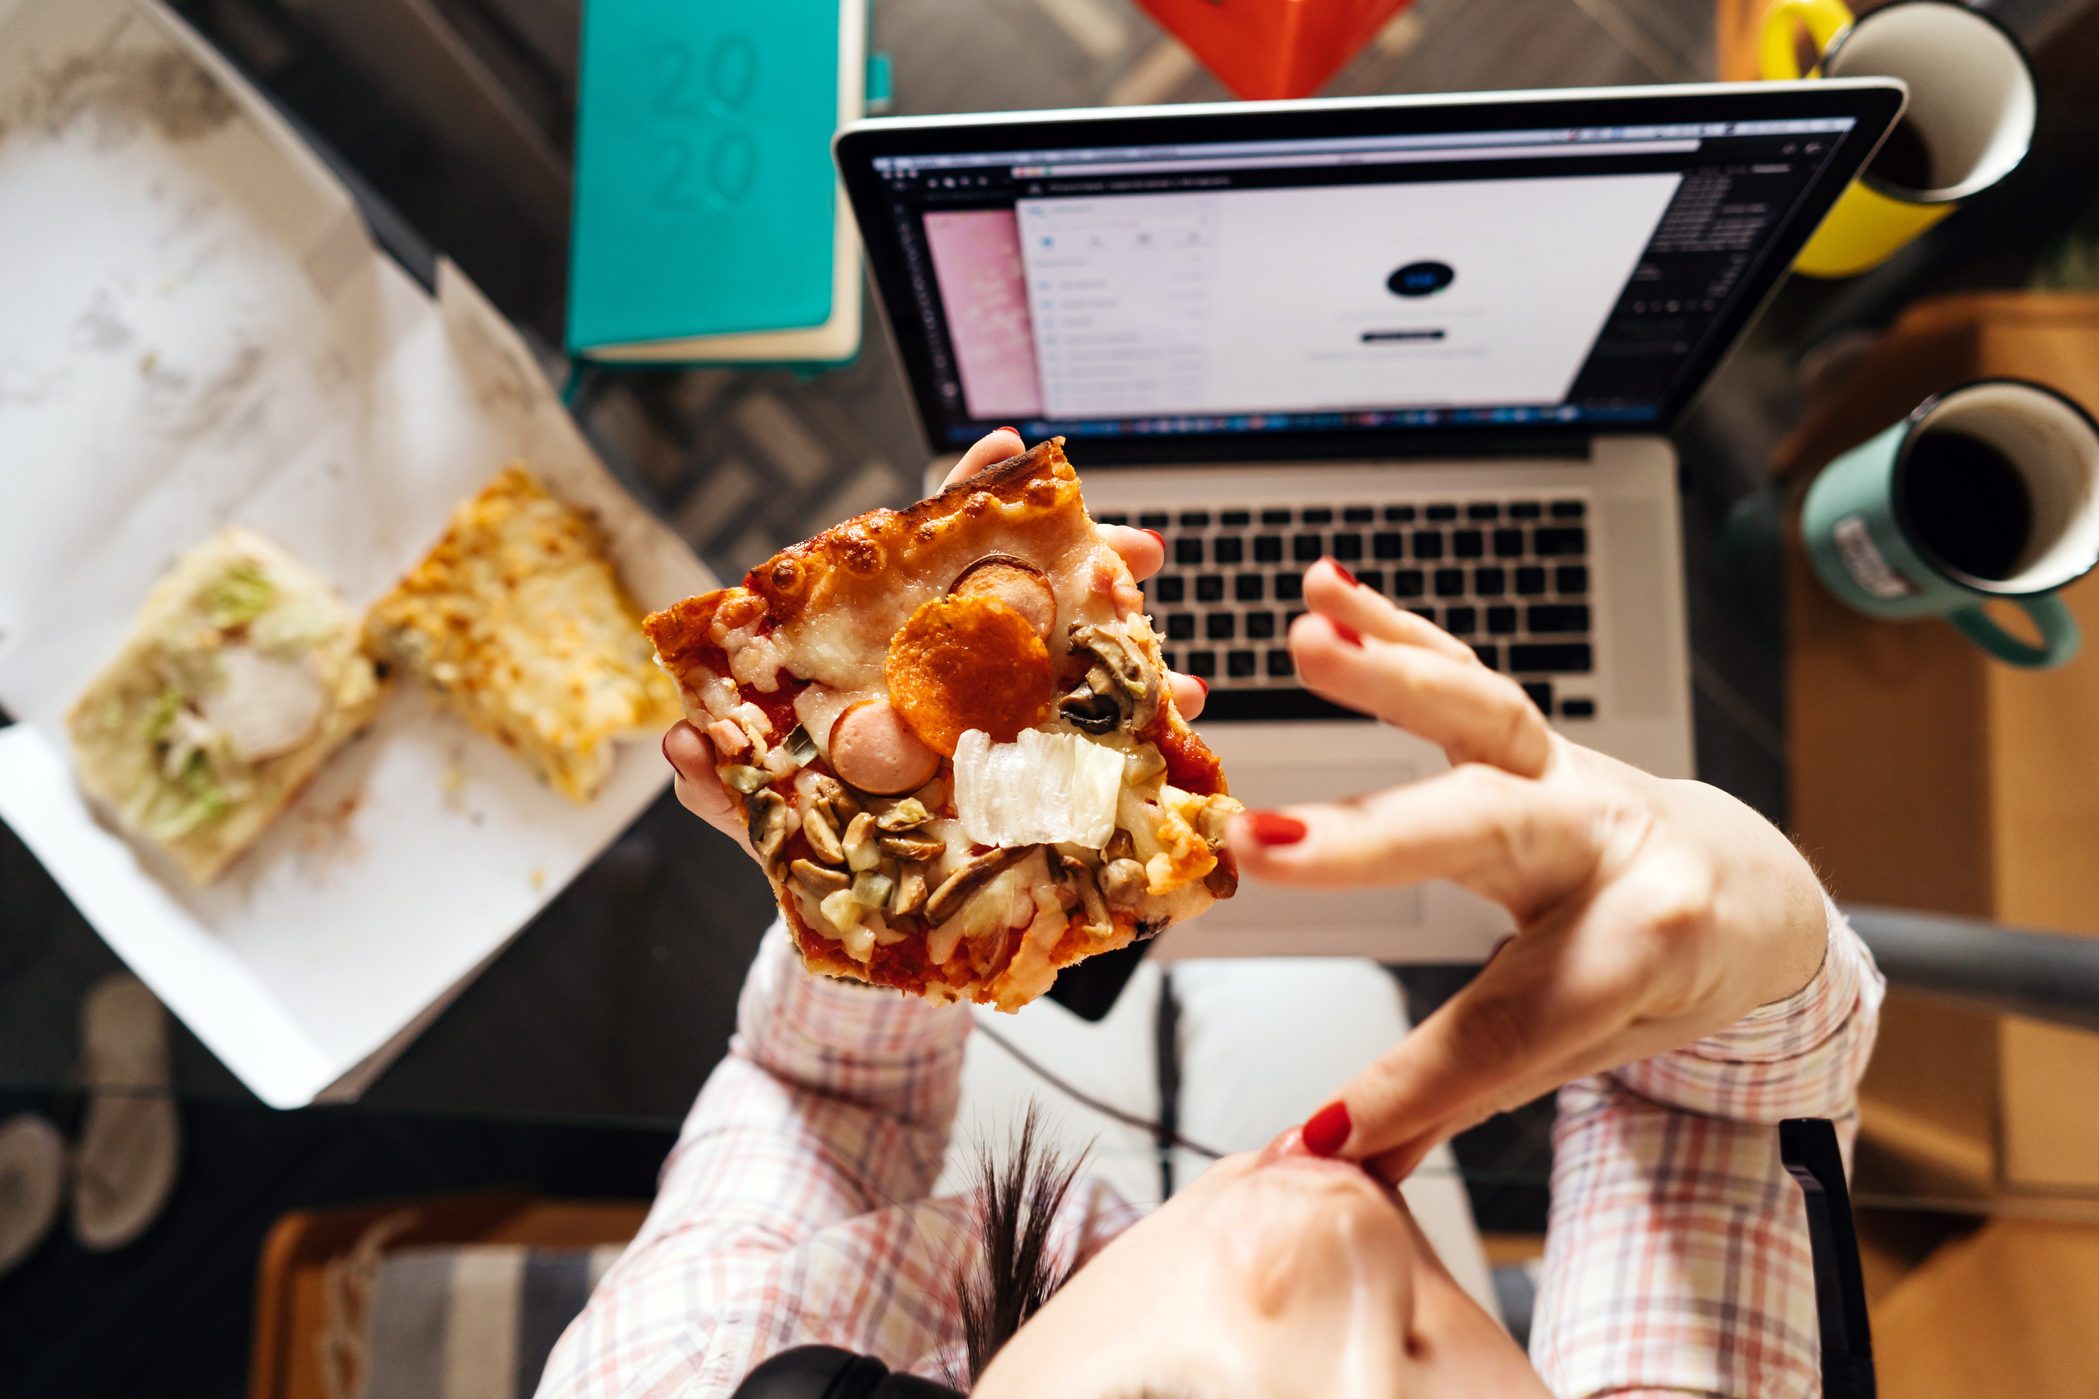 How to Prevent Overeating When You're Working from Home